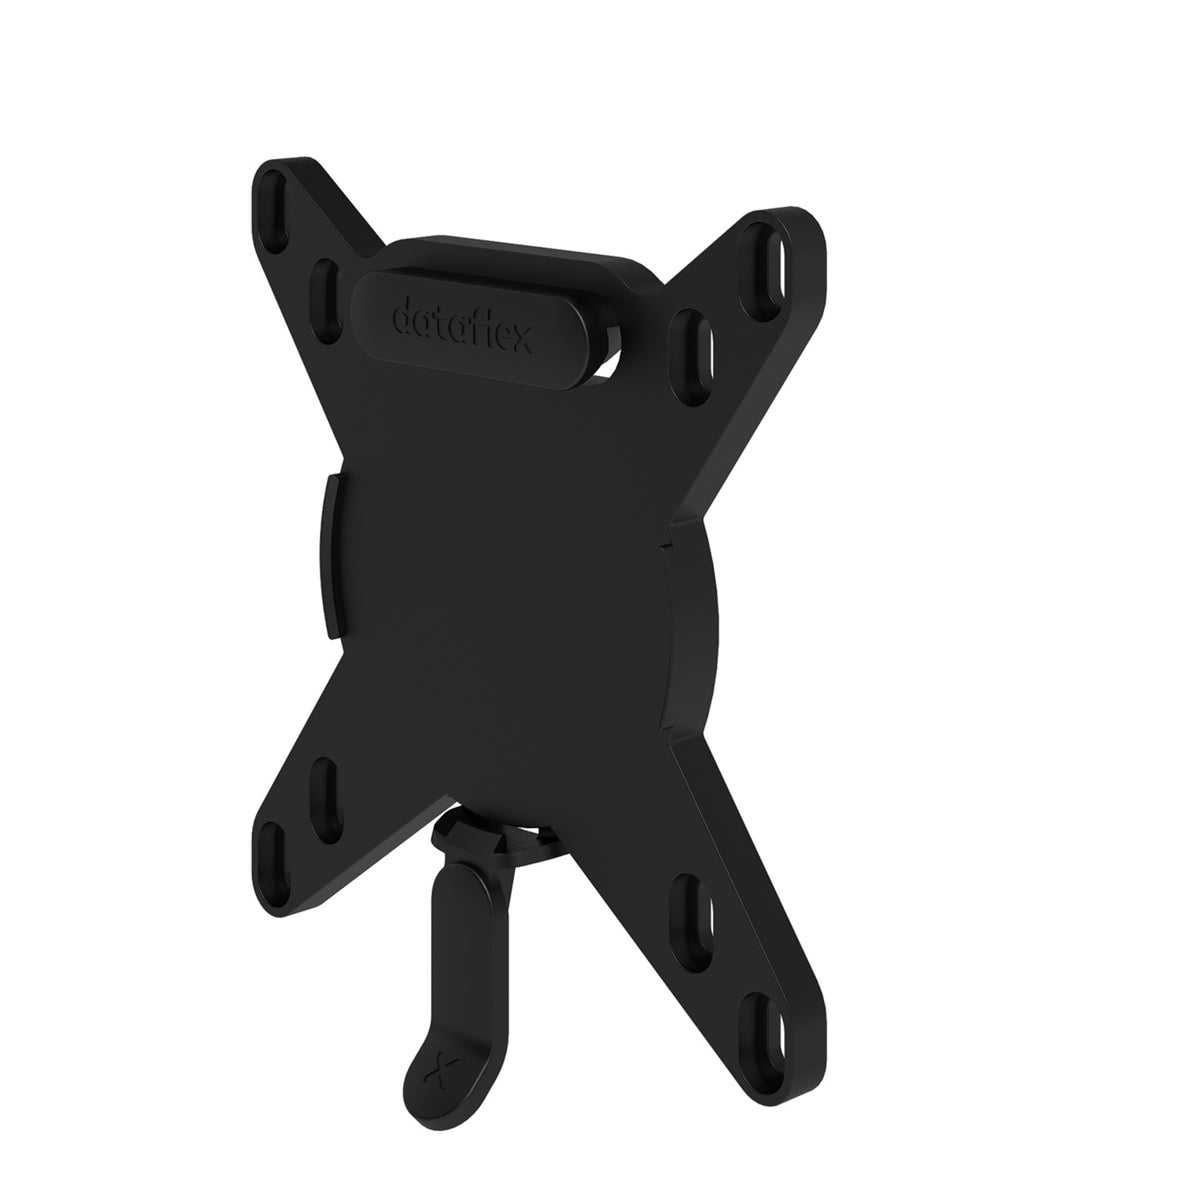 Viewmate quick release mount - option